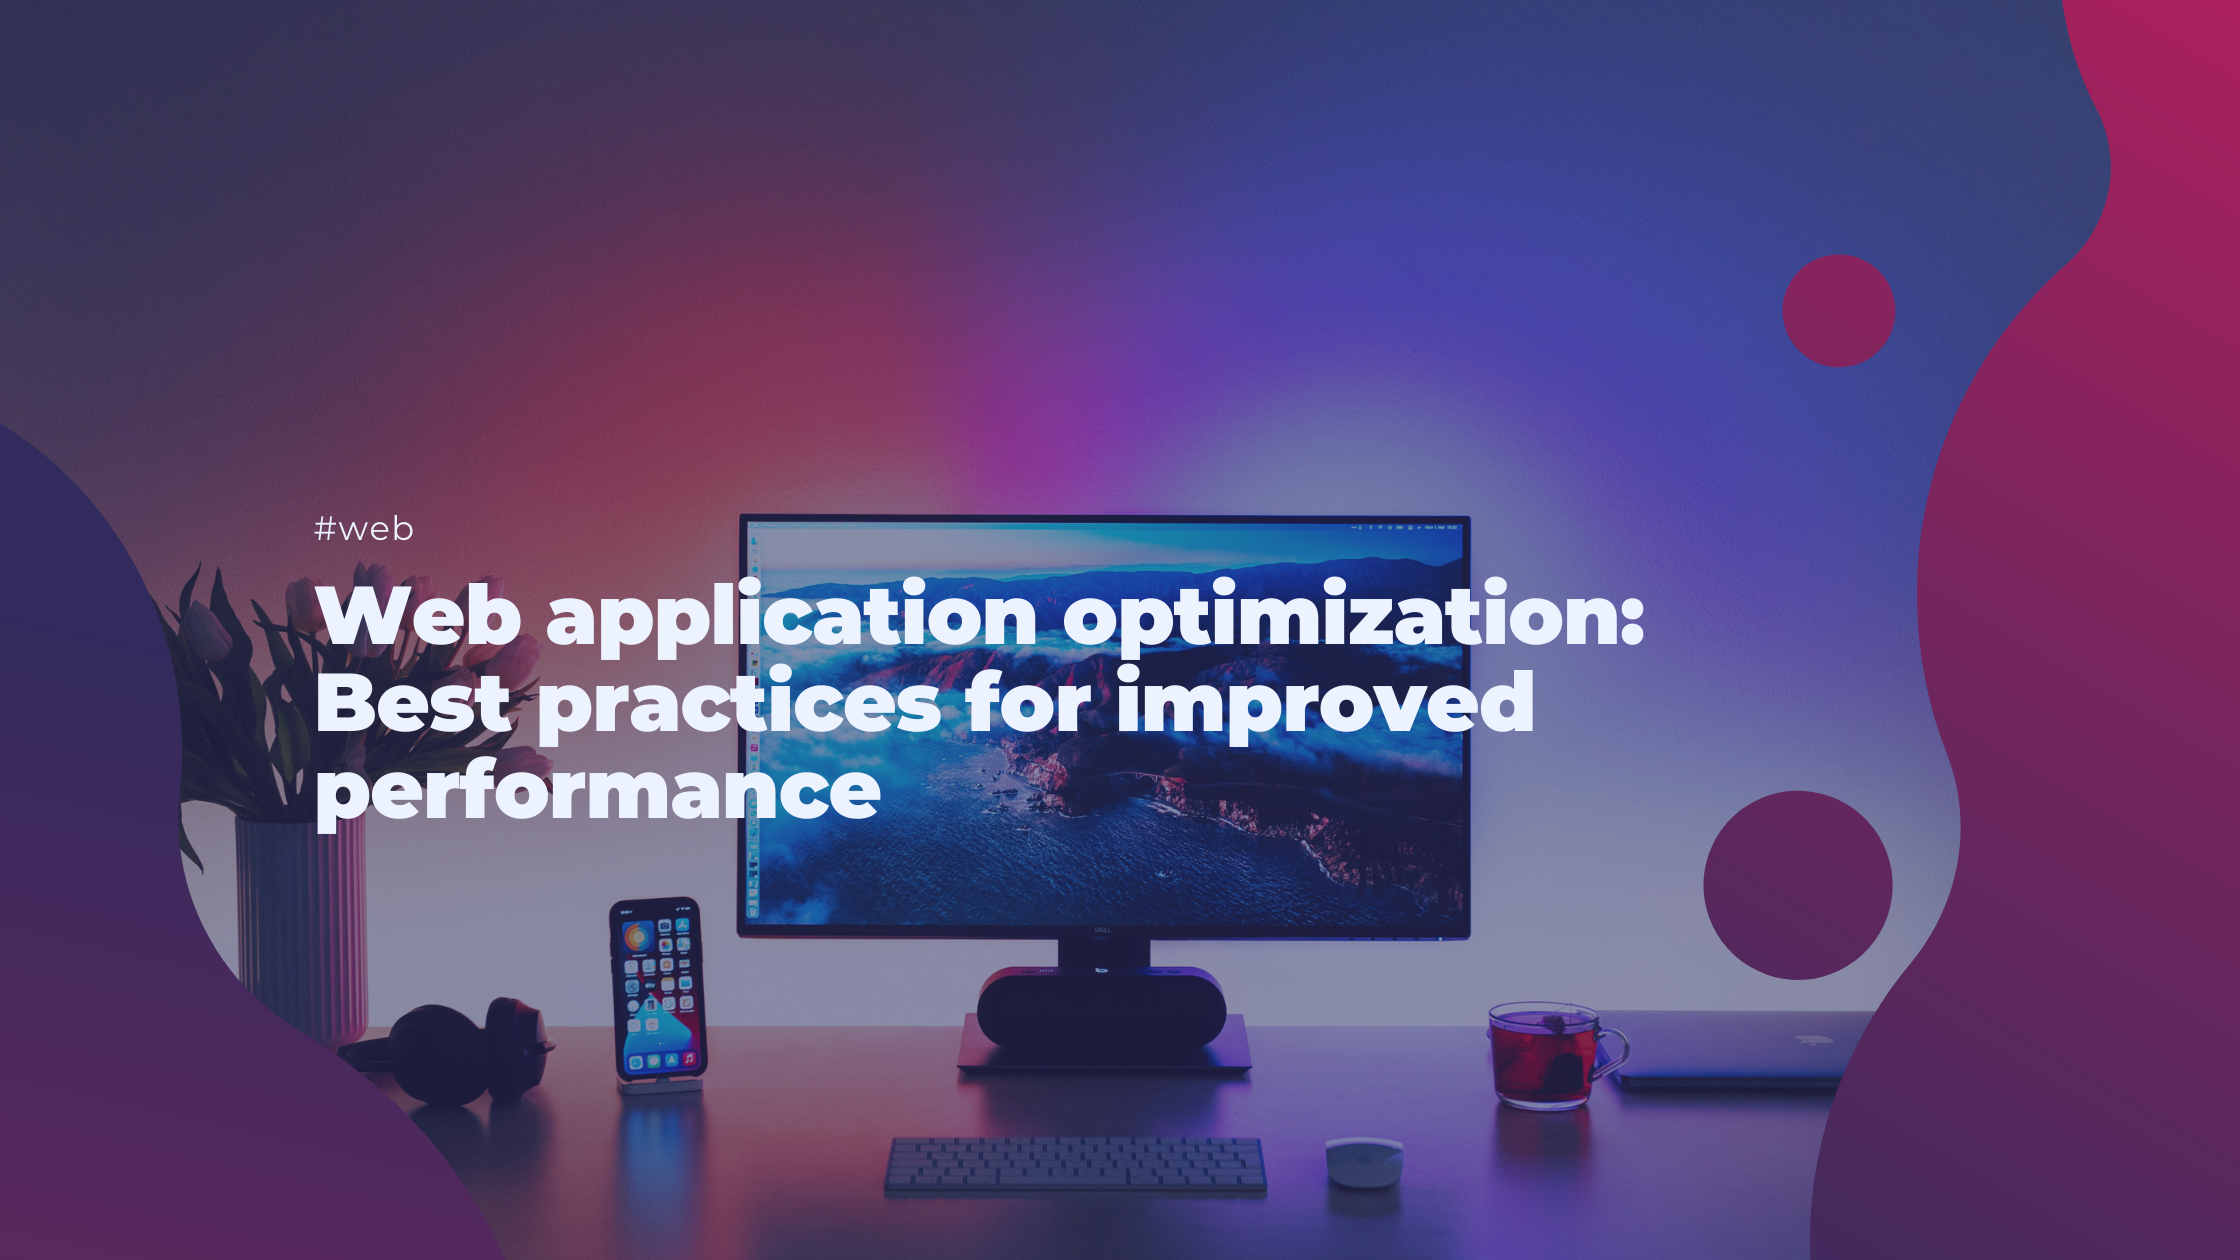 Web application optimization: Best practices for improved performance